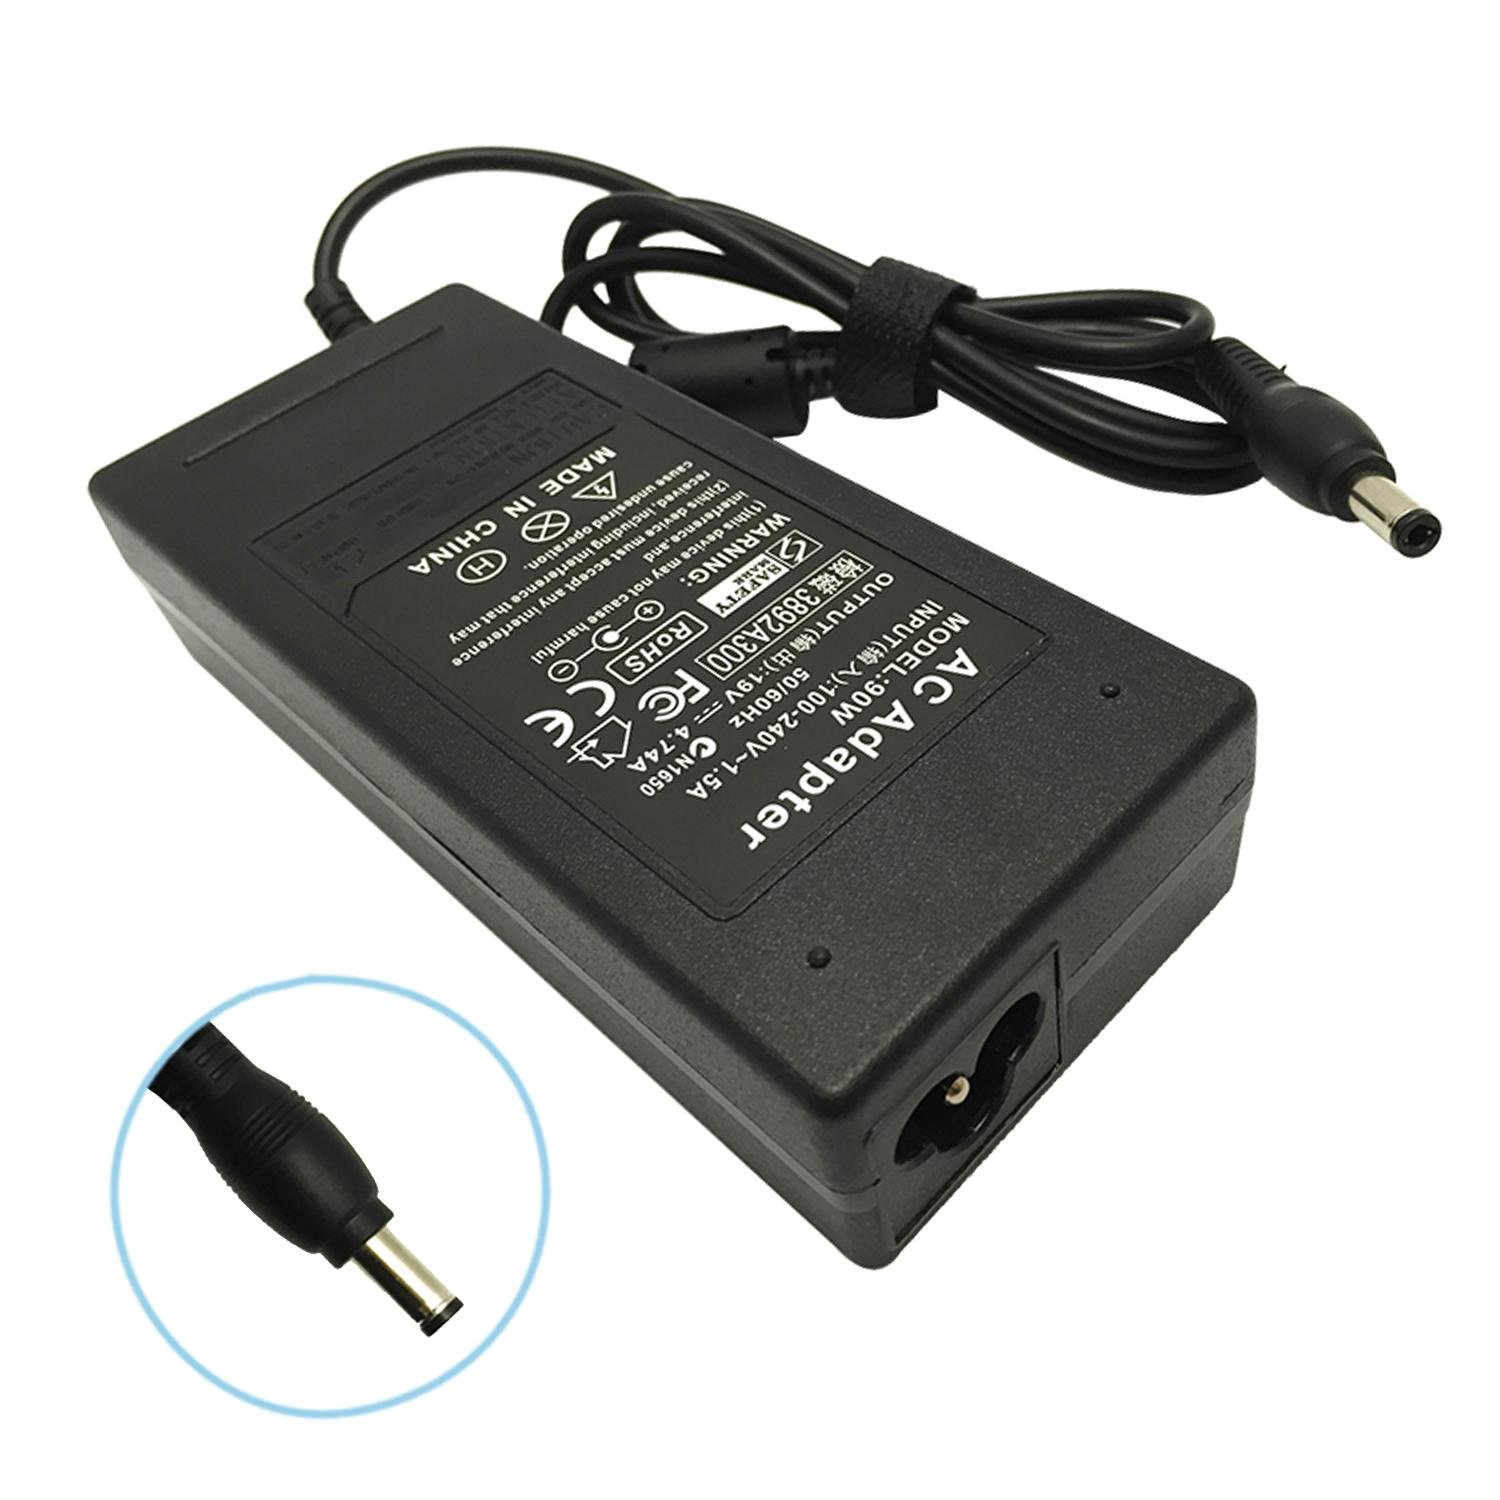 Laptop AC Power Adapter Charger 90w 19v 4.74a for Toshiba 2